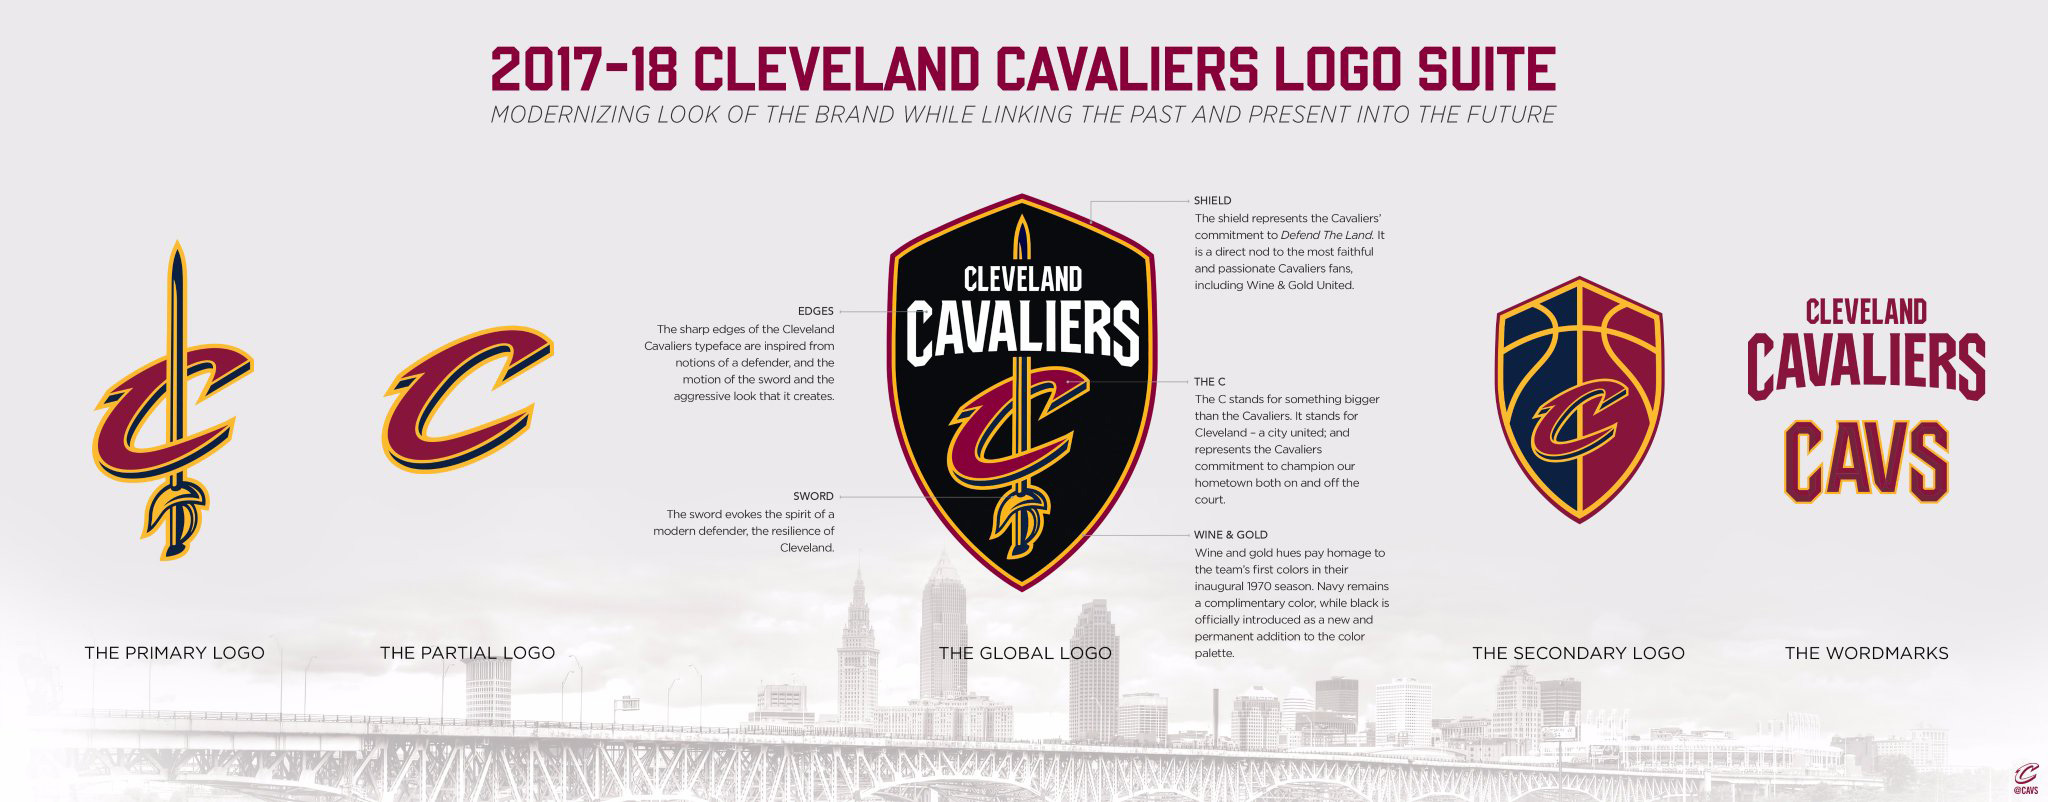 Brand New: New Logos for Cleveland Cavaliers by Nike Identity Group